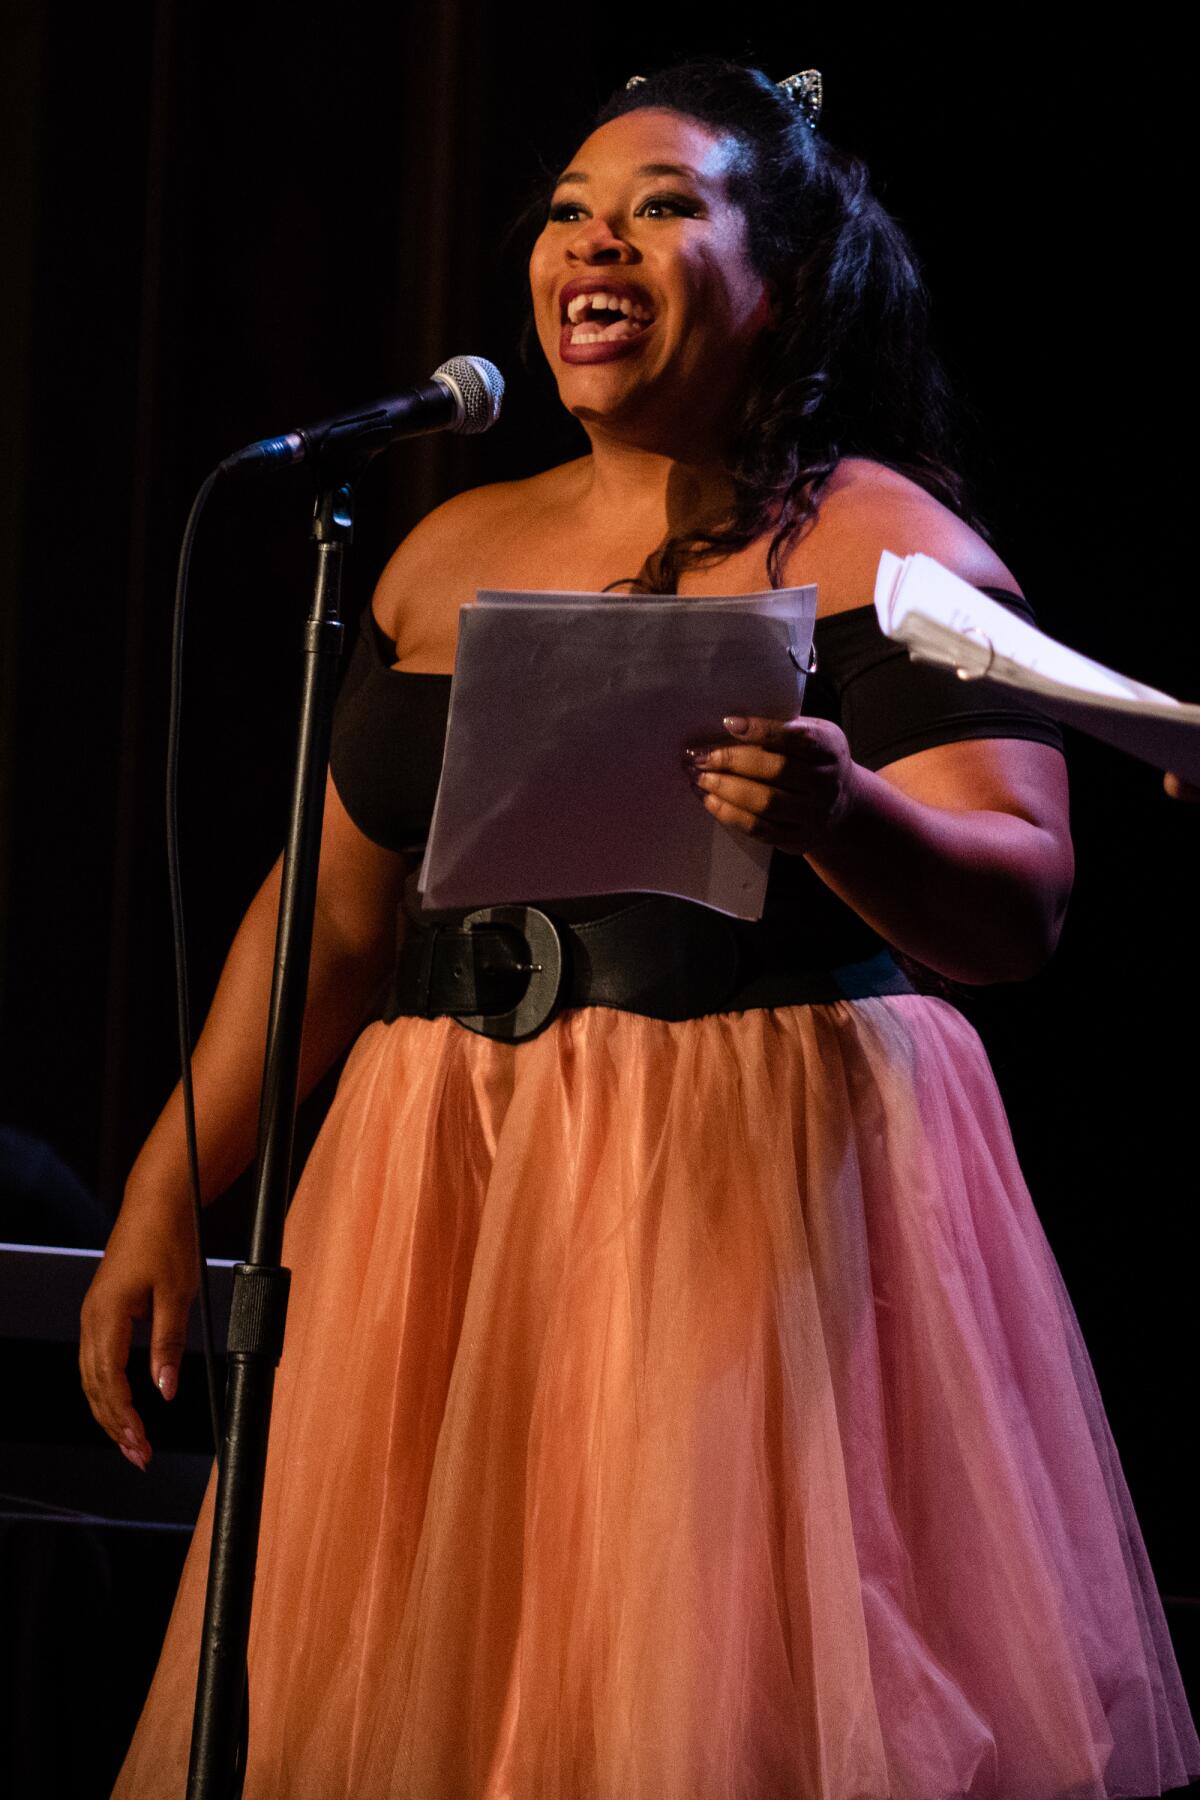 A woman at a microphone holds a script.